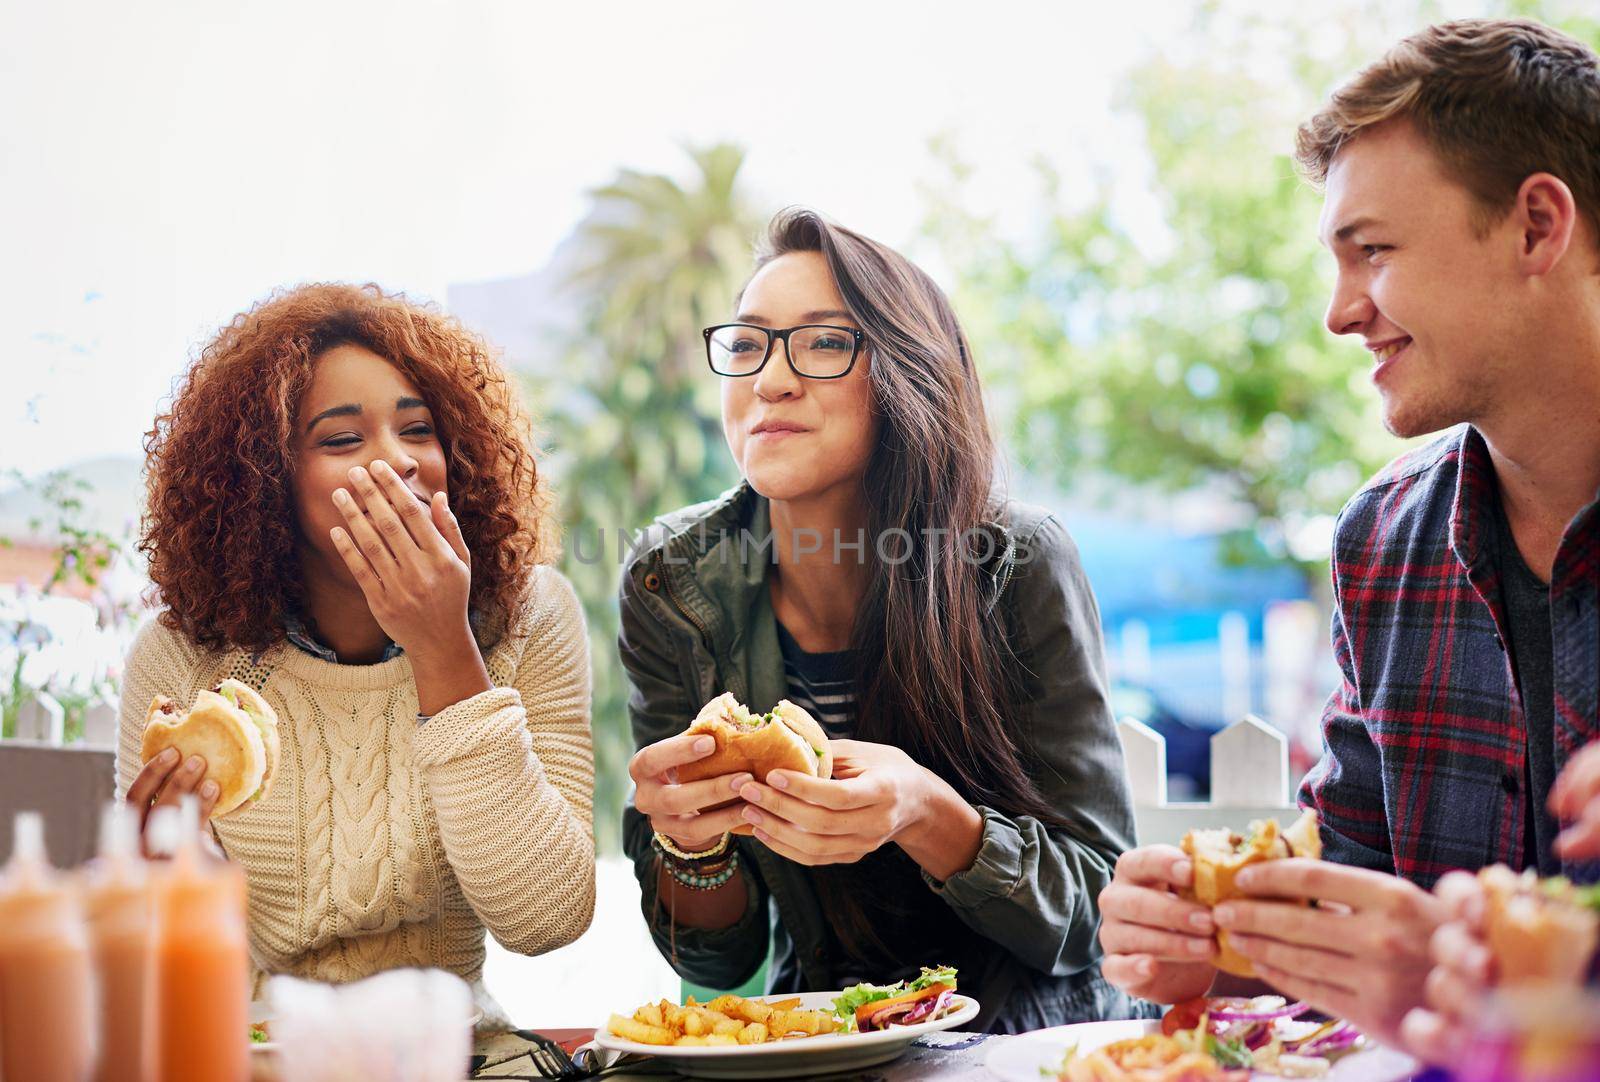 Cropped shot of three friends eating burgers outdoors